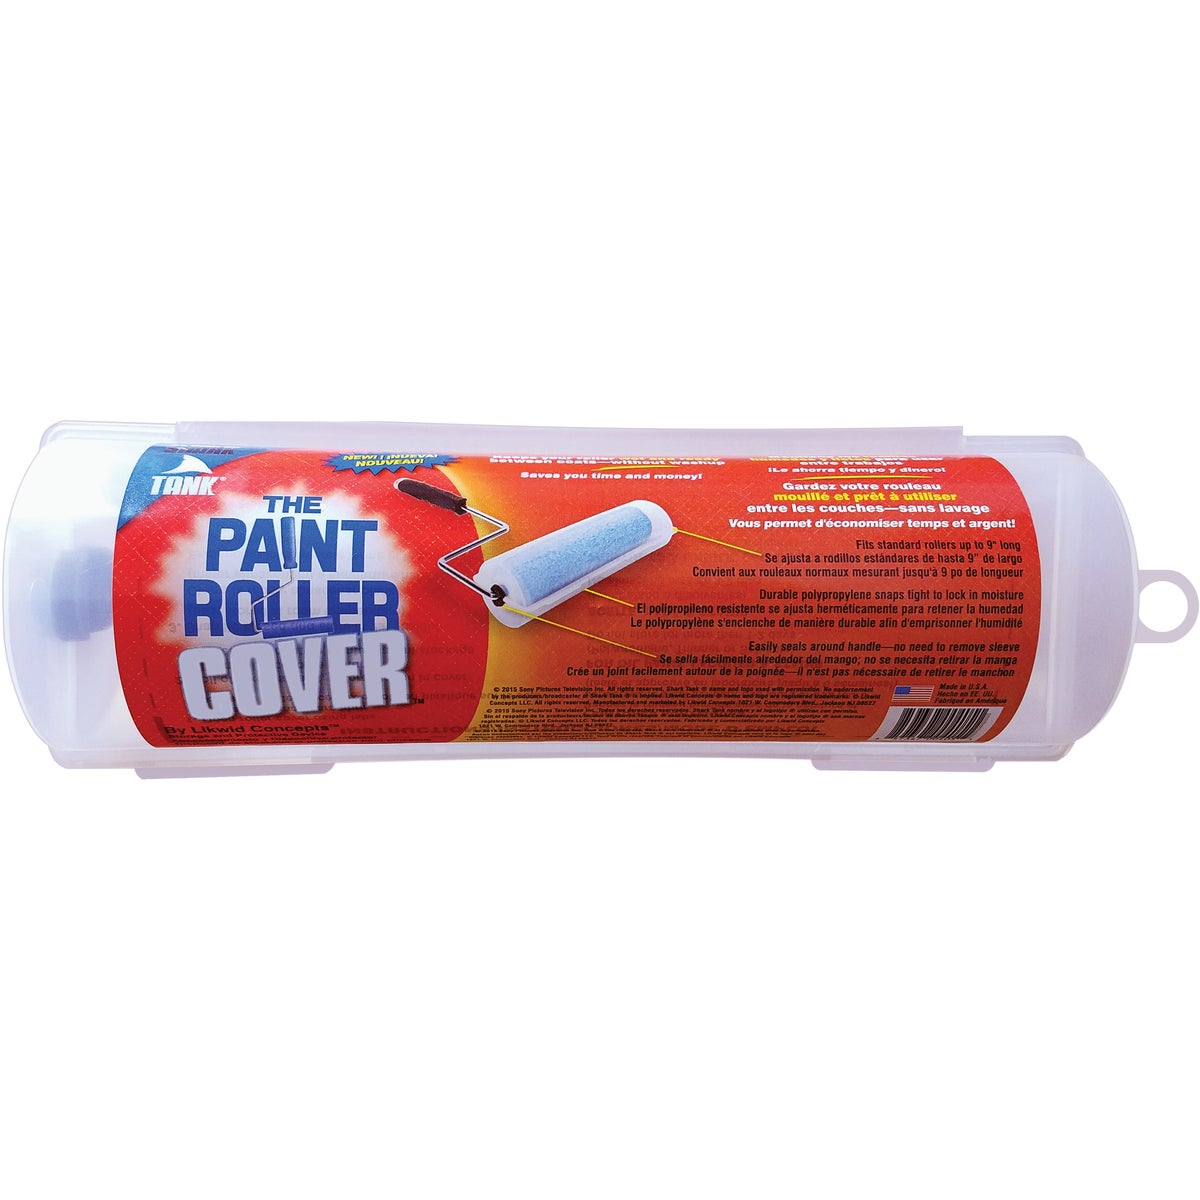 Item 771331, Airtight, sturdy case is designed to store and protect wet or dry paint 